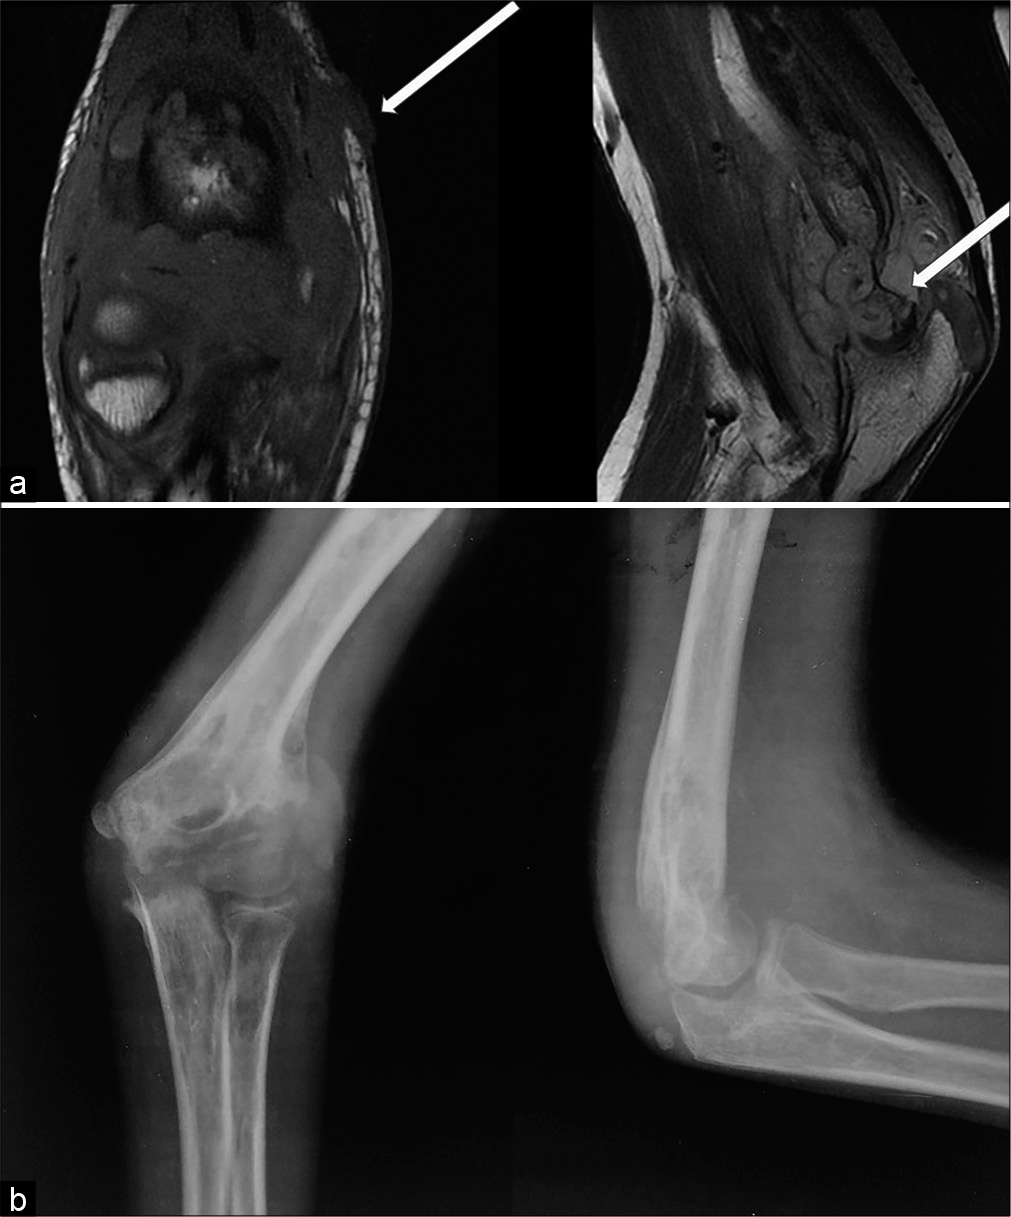 (a) Non-contrast T1-weighted coronal and T2-weighted sagittal MR images of a 13-year-old male child who complained of swelling and pain over Rt elbow of 6 months duration reveals Grade 3 synovial thickening, Grade 3 erosion involving the trochlea (thick arrow), and an ulcer over the medial epicondyle (thin arrow). (b) Radiograph anteroposterior and lateral view of the Rt elbow revealed large erosions, periarticular osteopenia, soft-tissue edema.